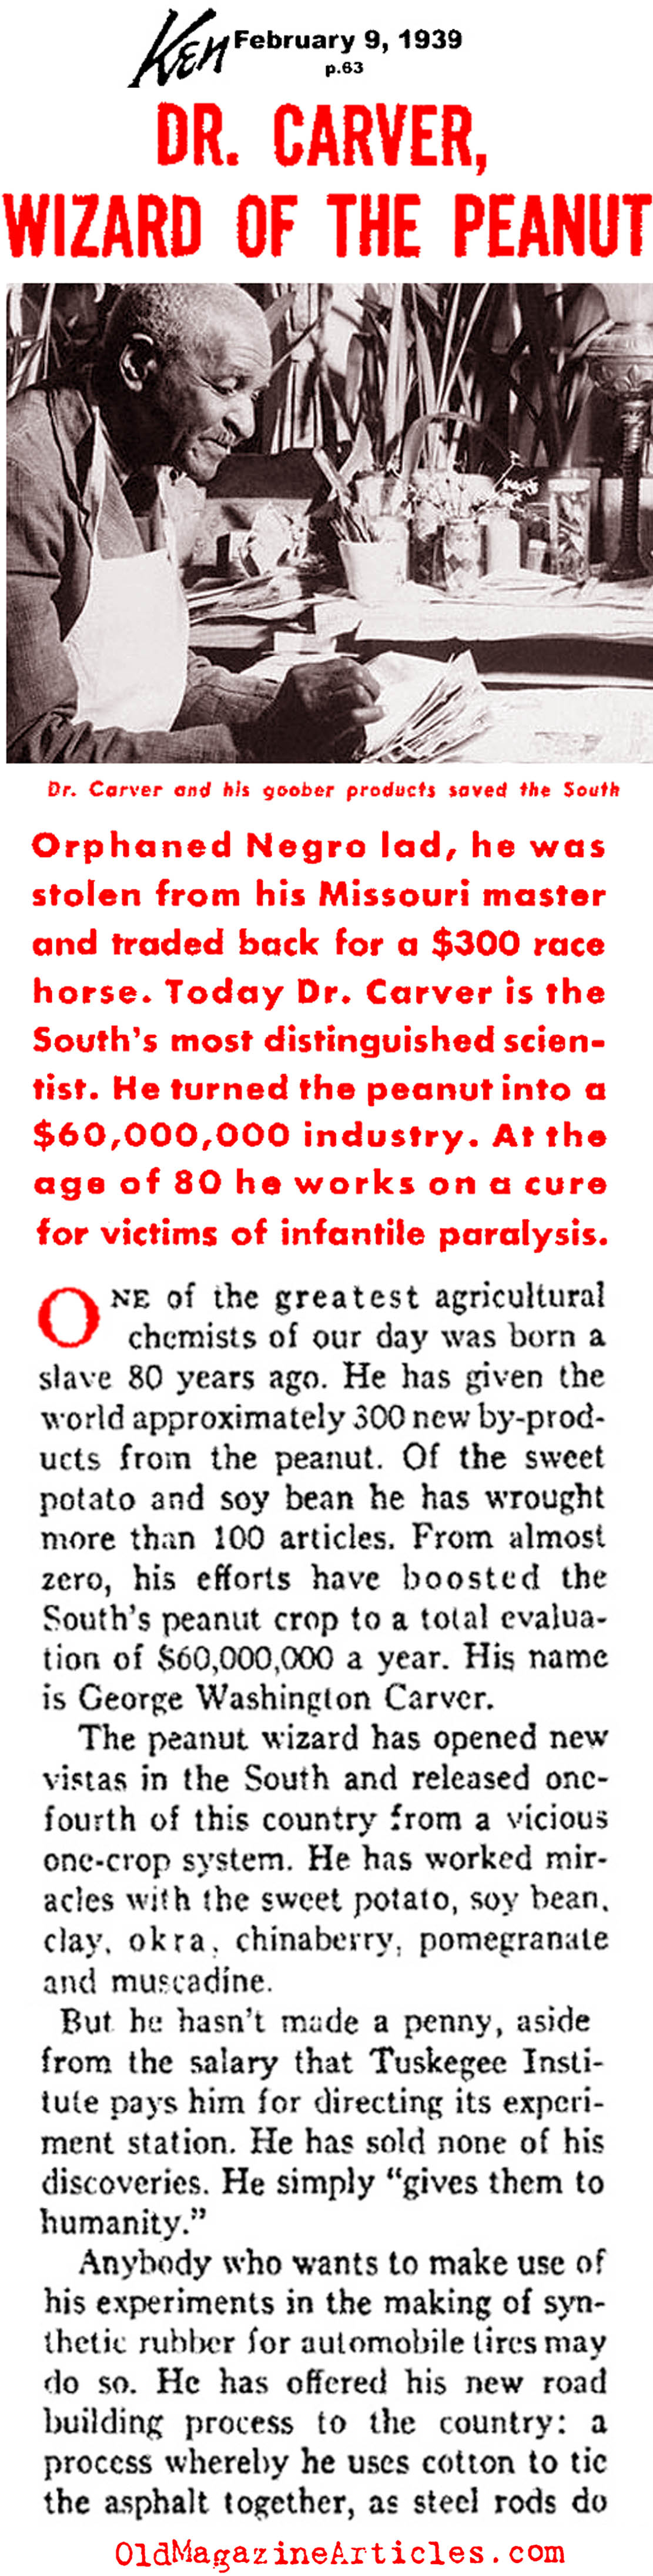 An Interview with Dr. George Washington Carver (Ken Magazine, 1938)